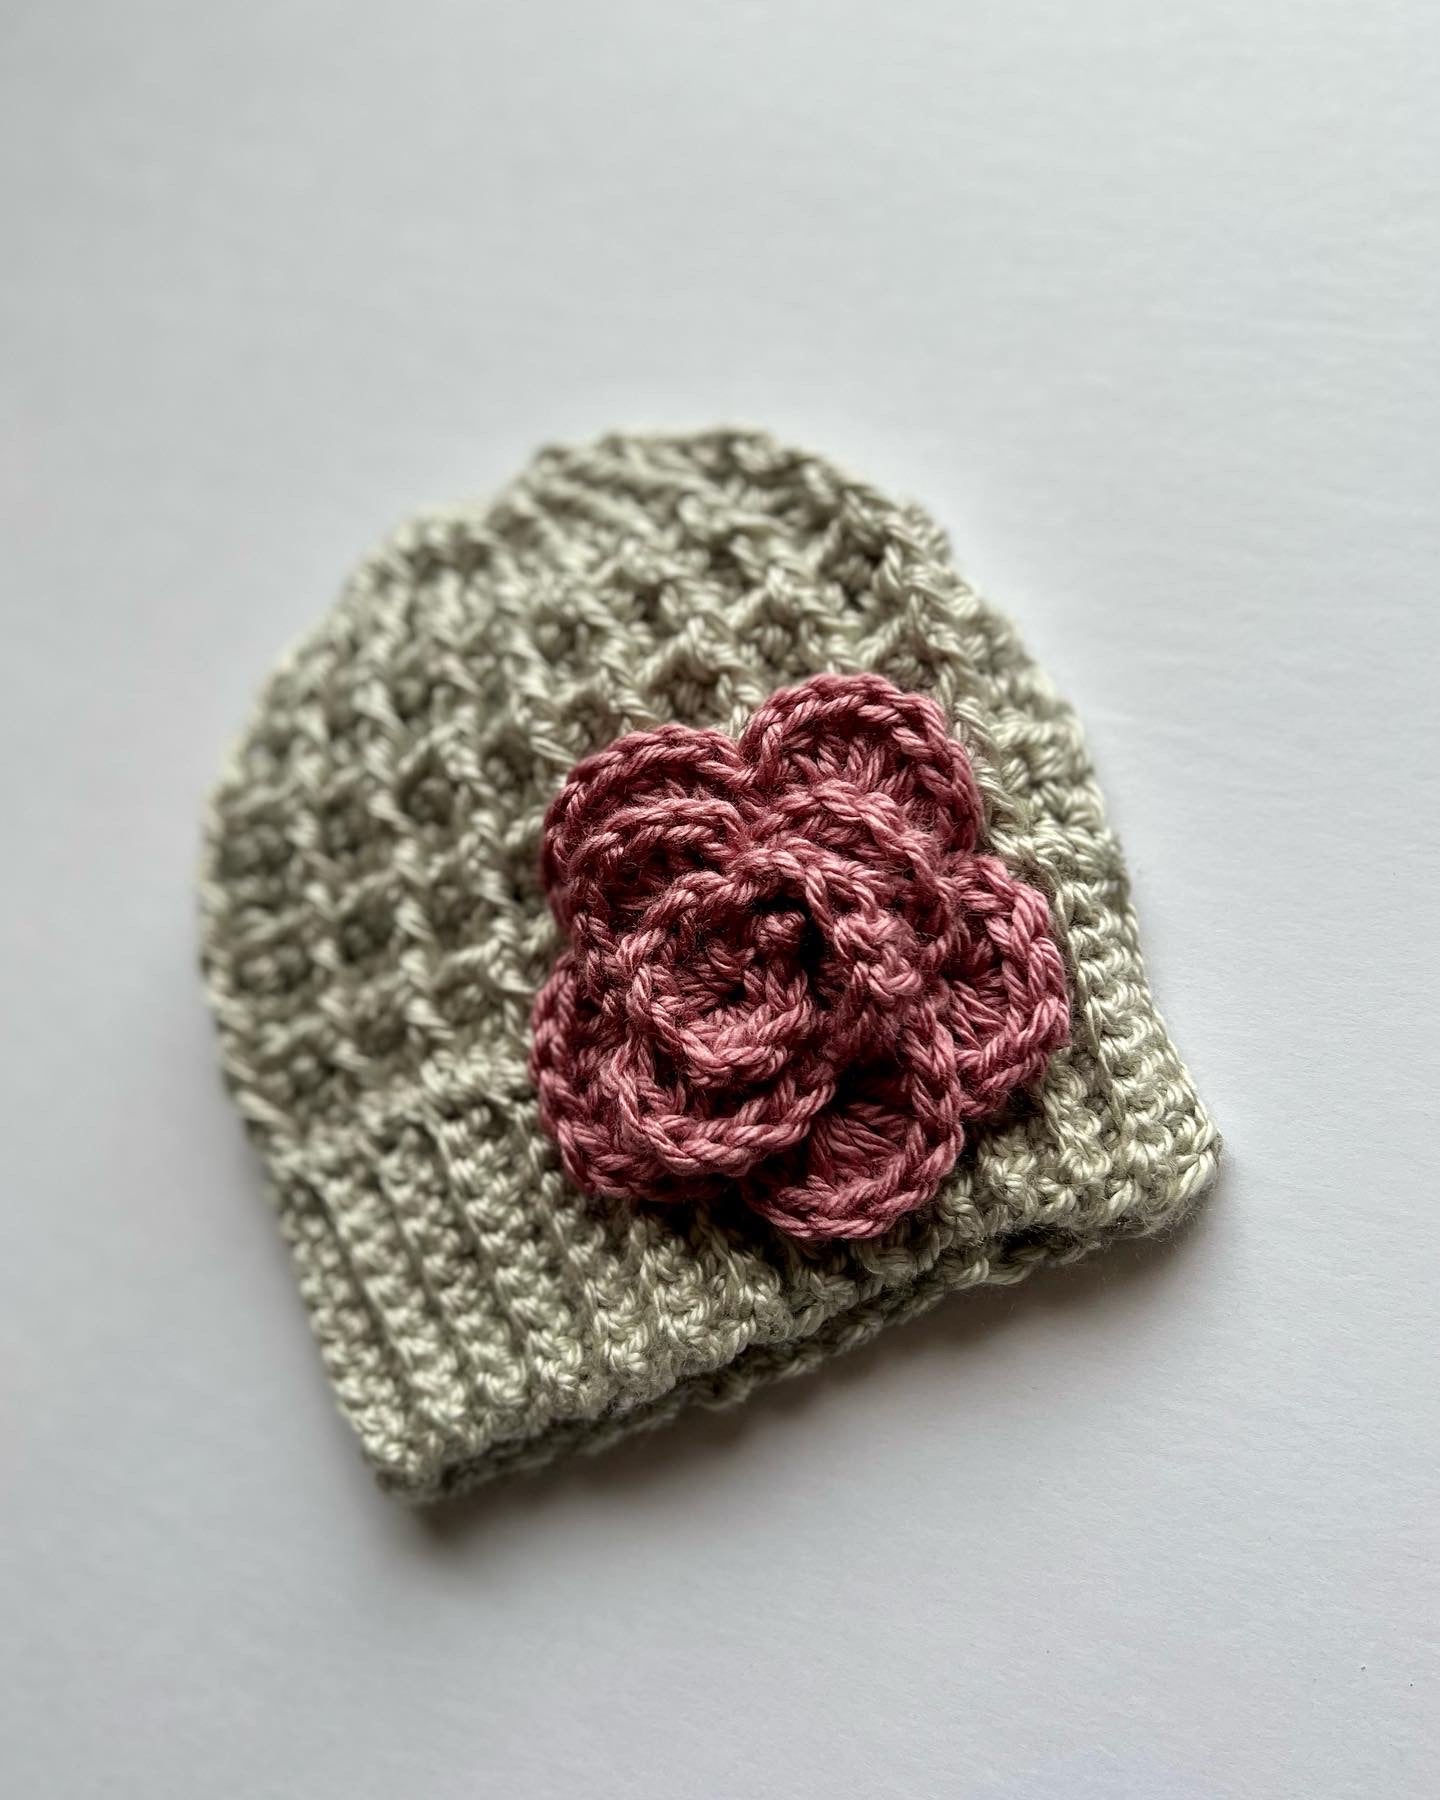 Silver/light gray hat with pink crochet flower - Lilly Grace Sparkle Boutique